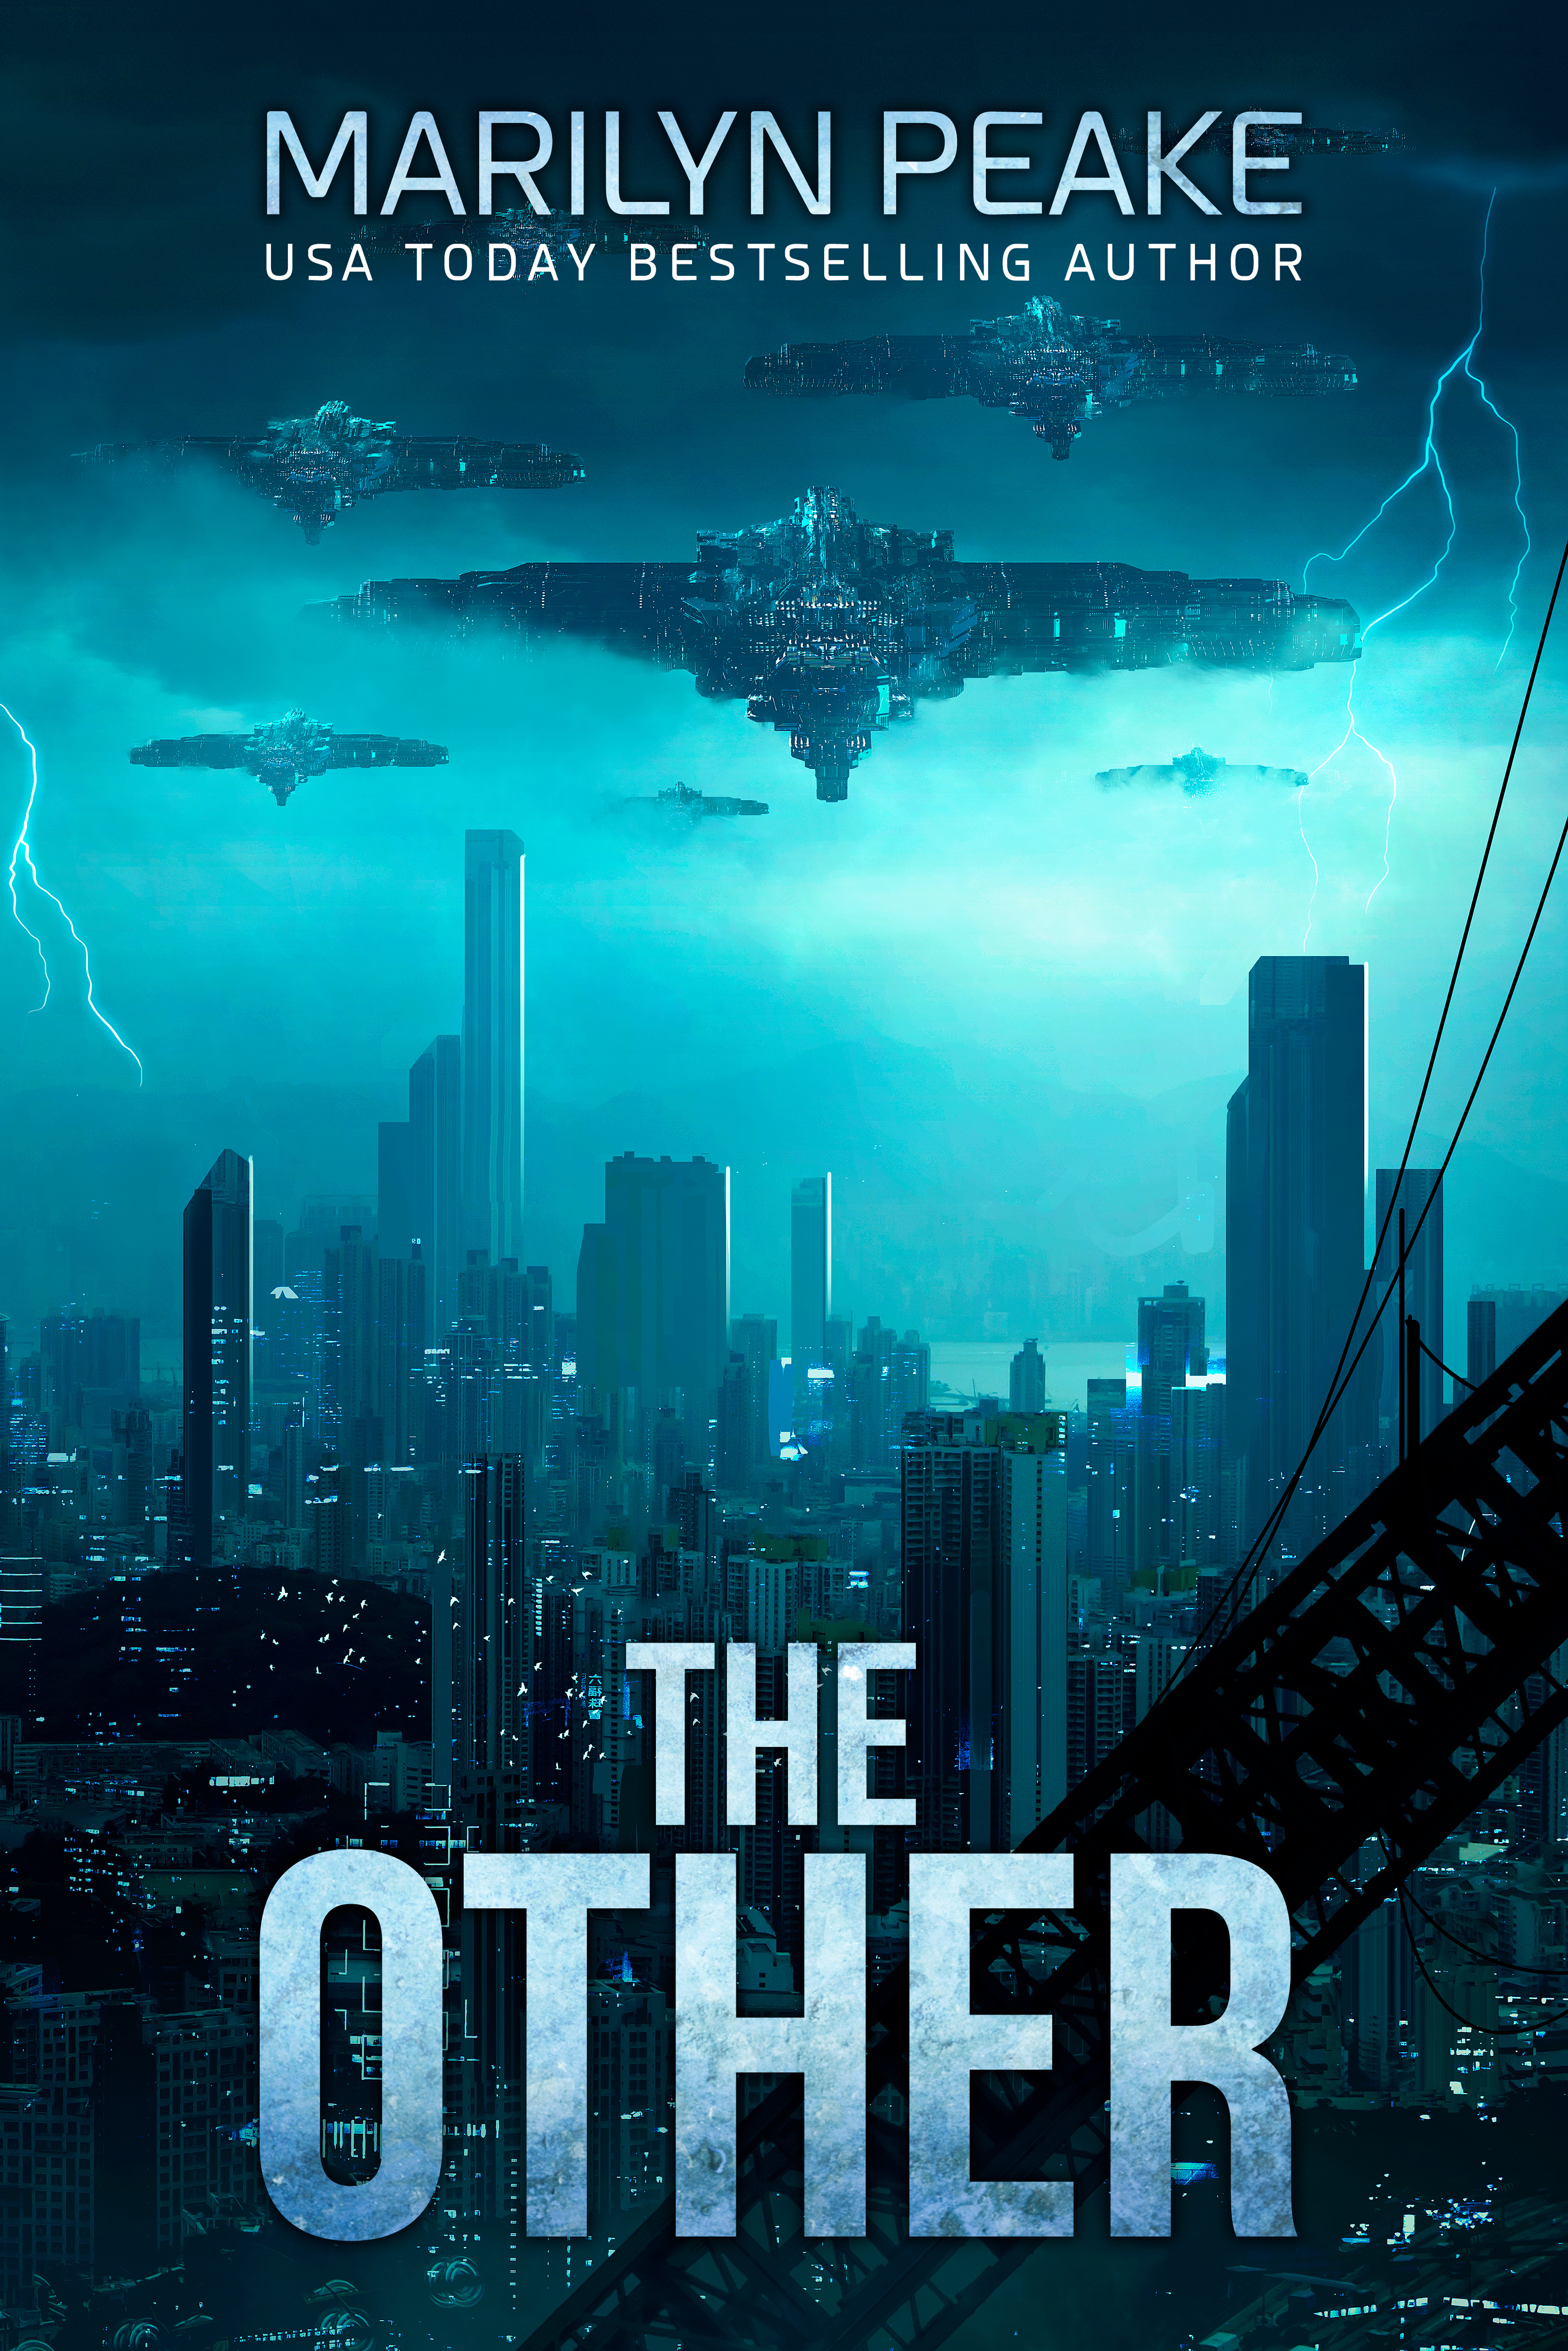 Cover of Marilyn Peake's science fiction novel The Other